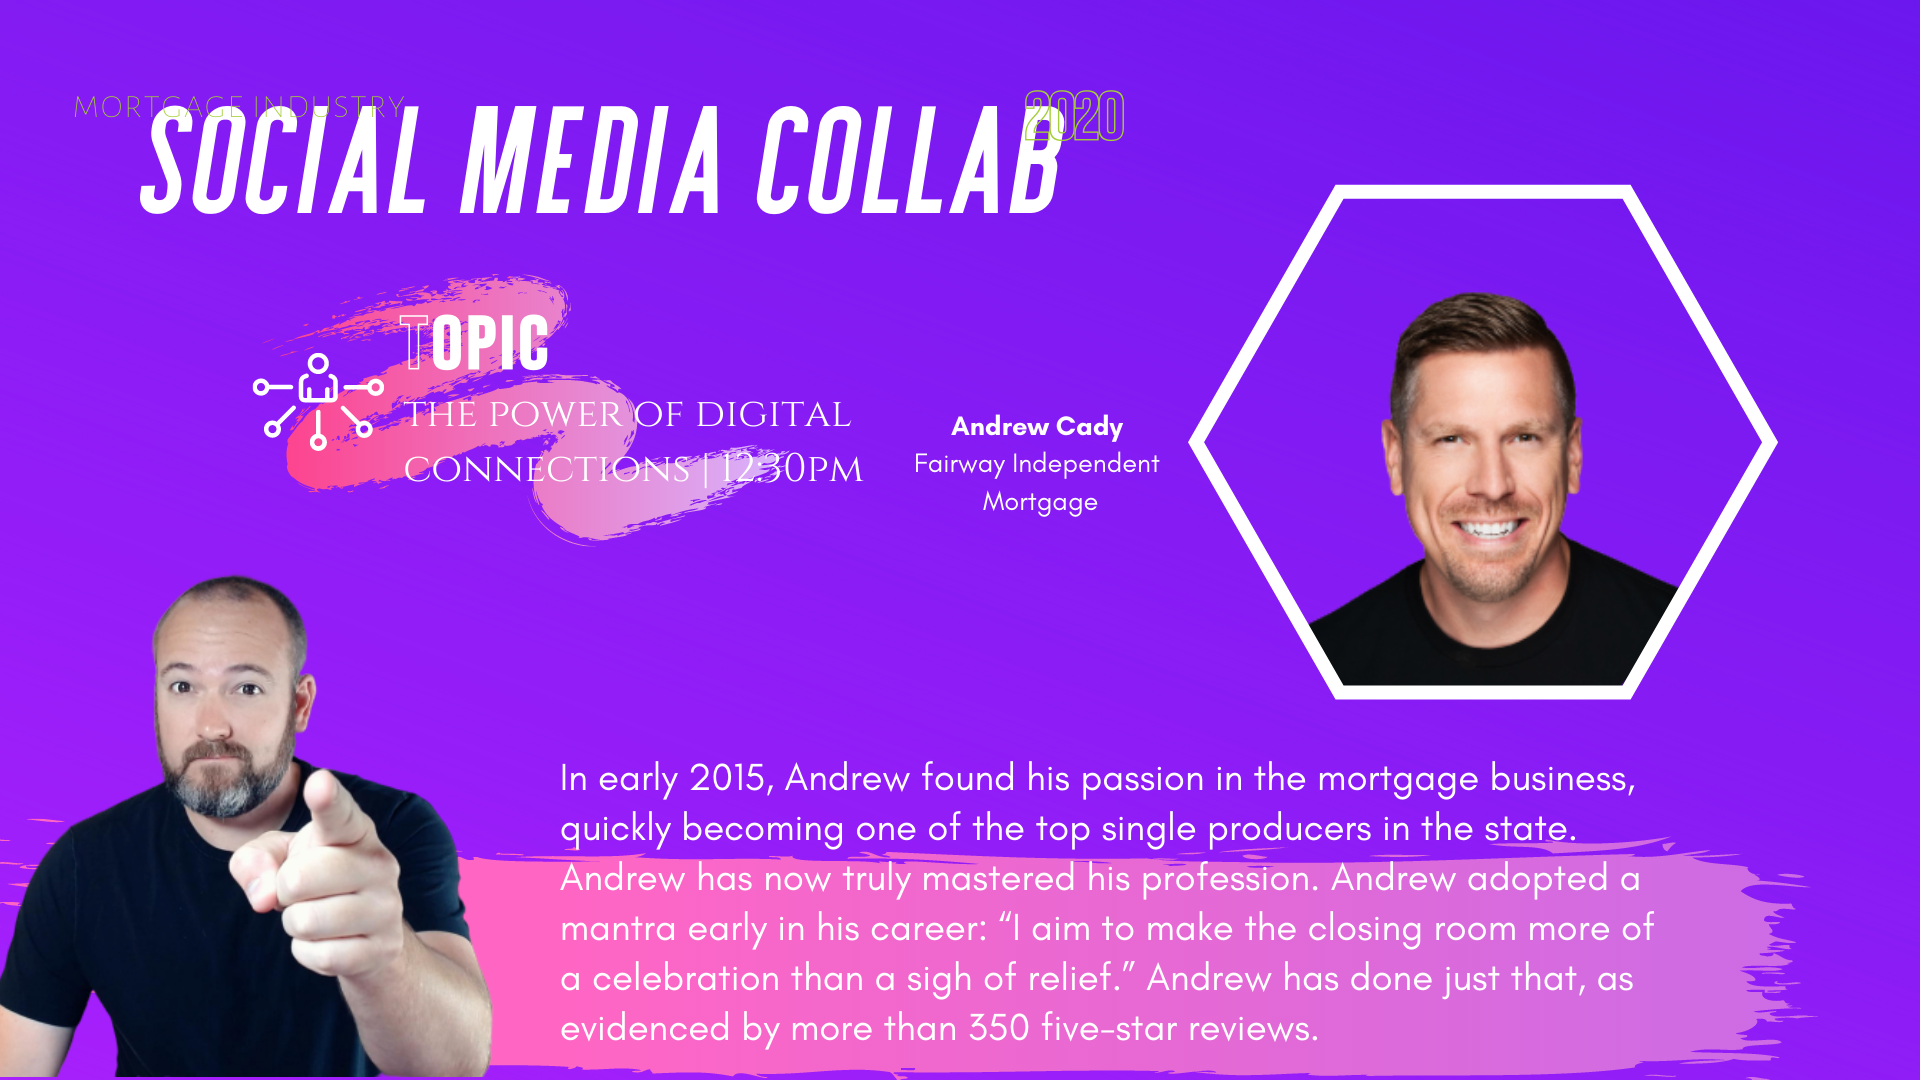 The Power of Digital Connection | Andrew Cady